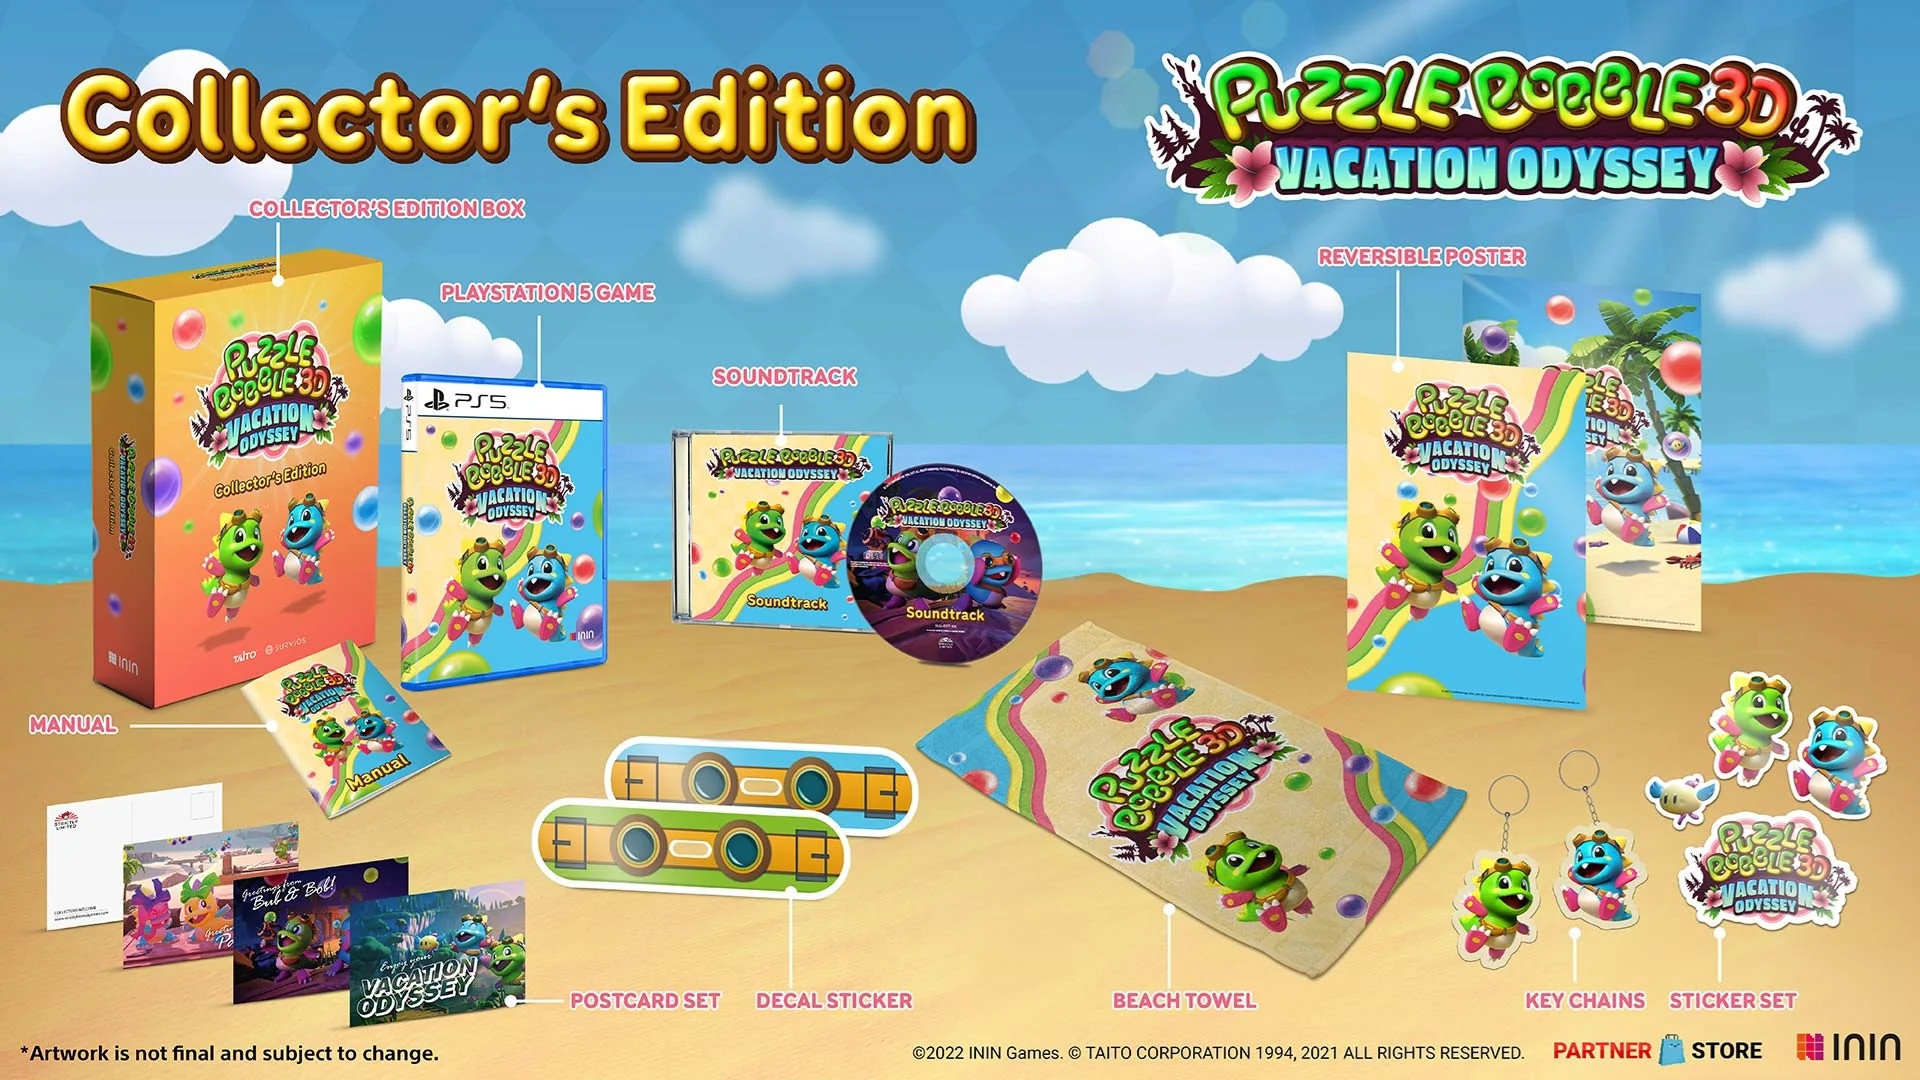 Puzzle Bobble 3D: Vacation Odyssey - Collector's Edition (Strictly Limited) (PS5), ININ Games